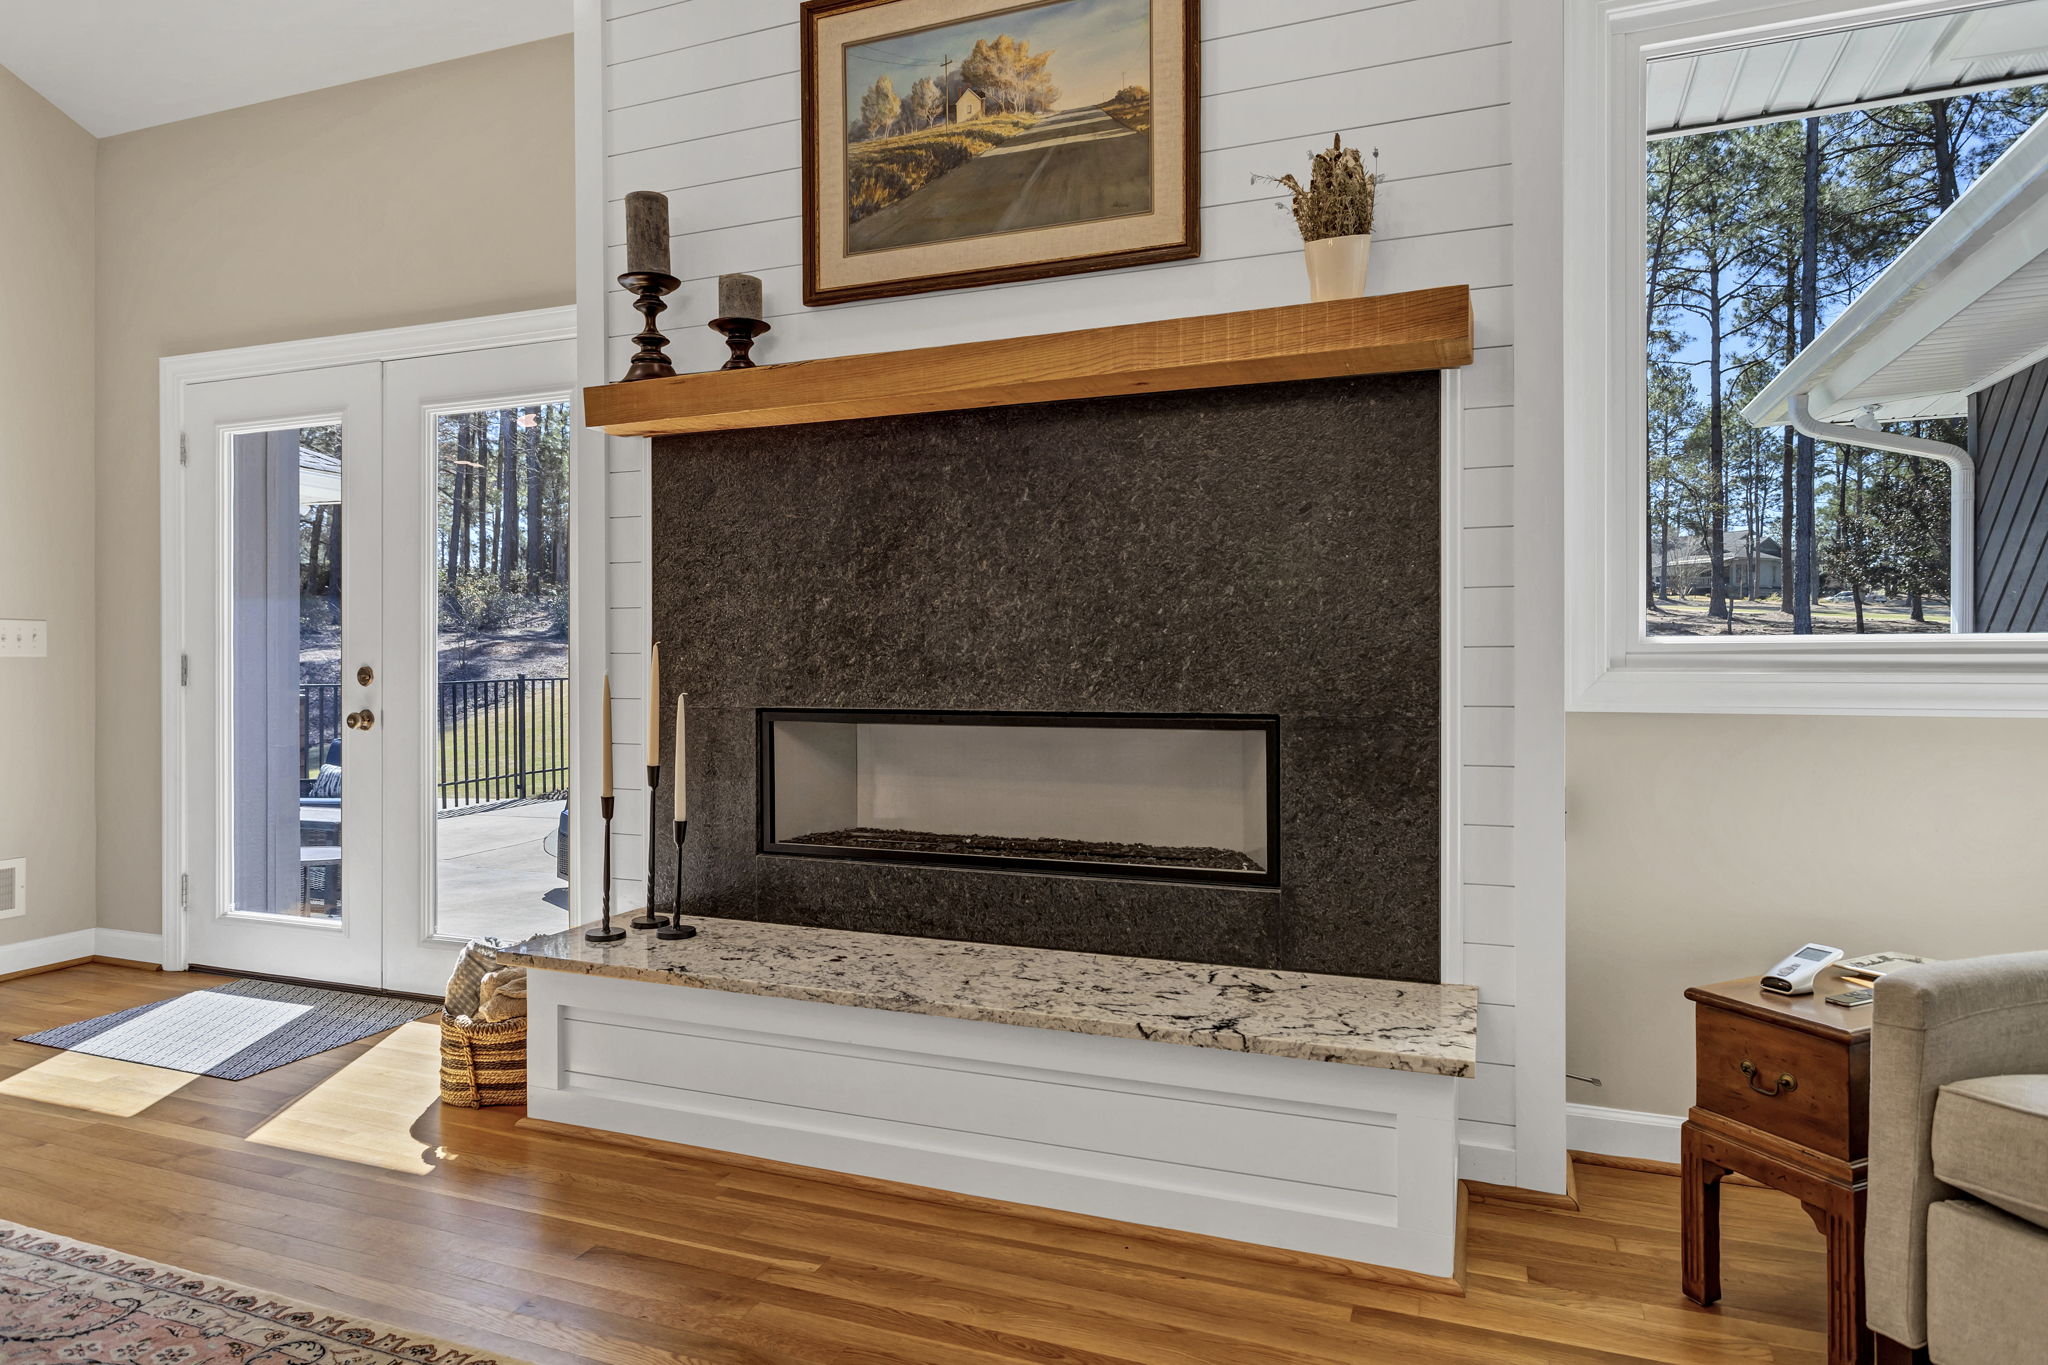 Custom hearth and surround highlight this ventless gas fireplace.